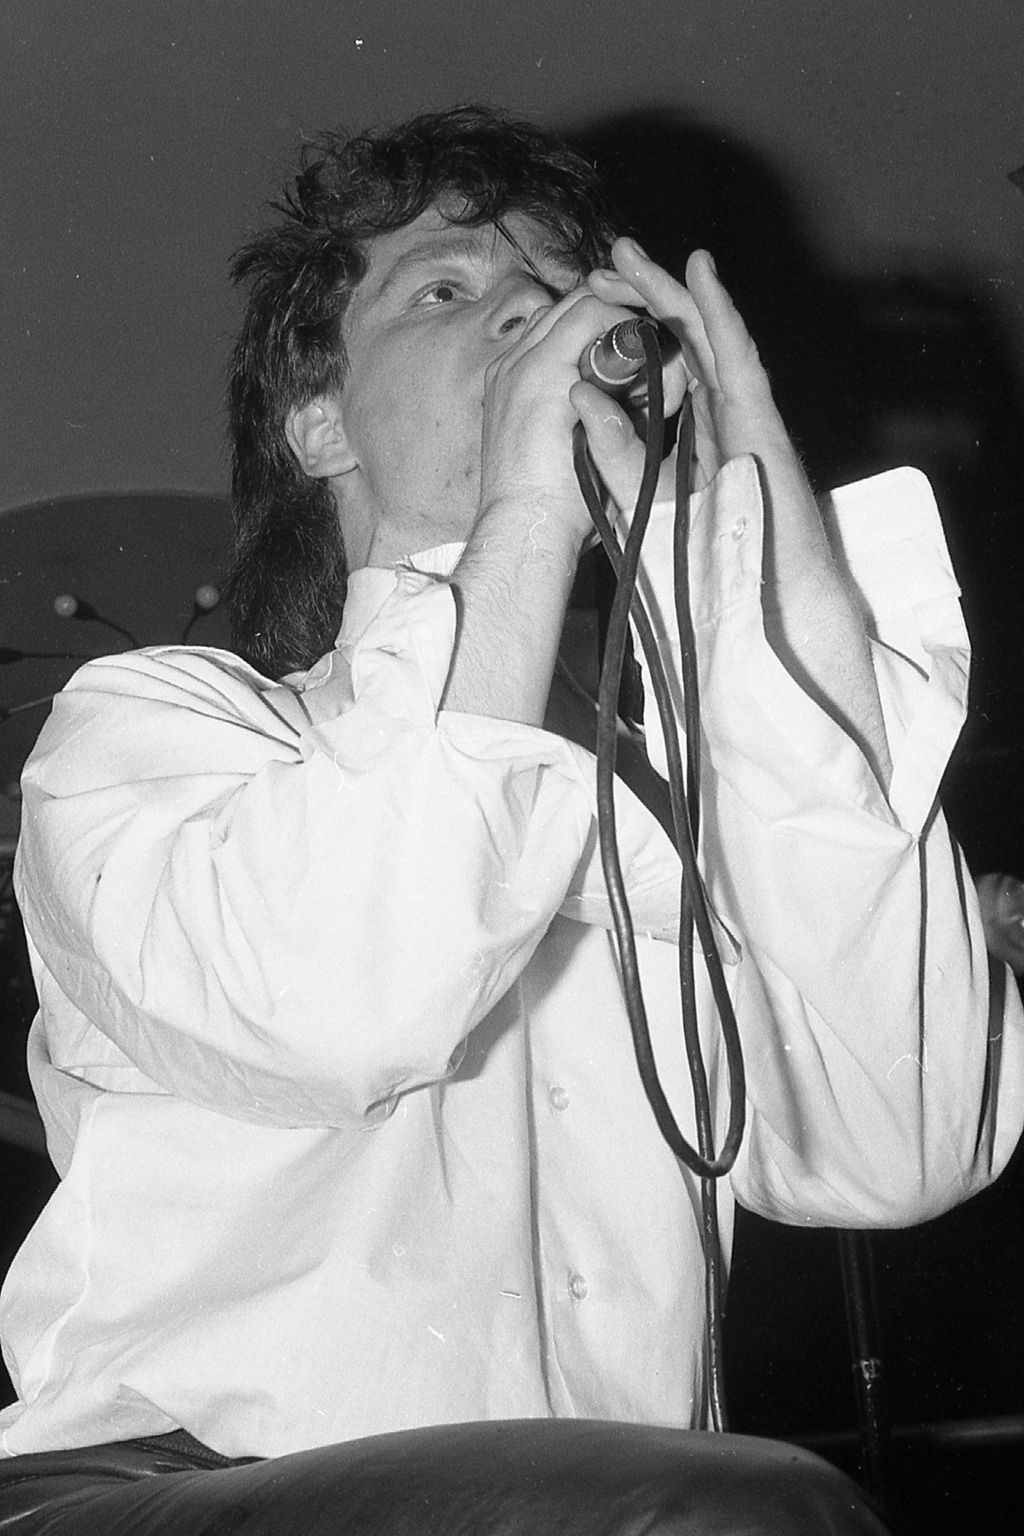 Bono performing at the University of Strathclyde in 1981 